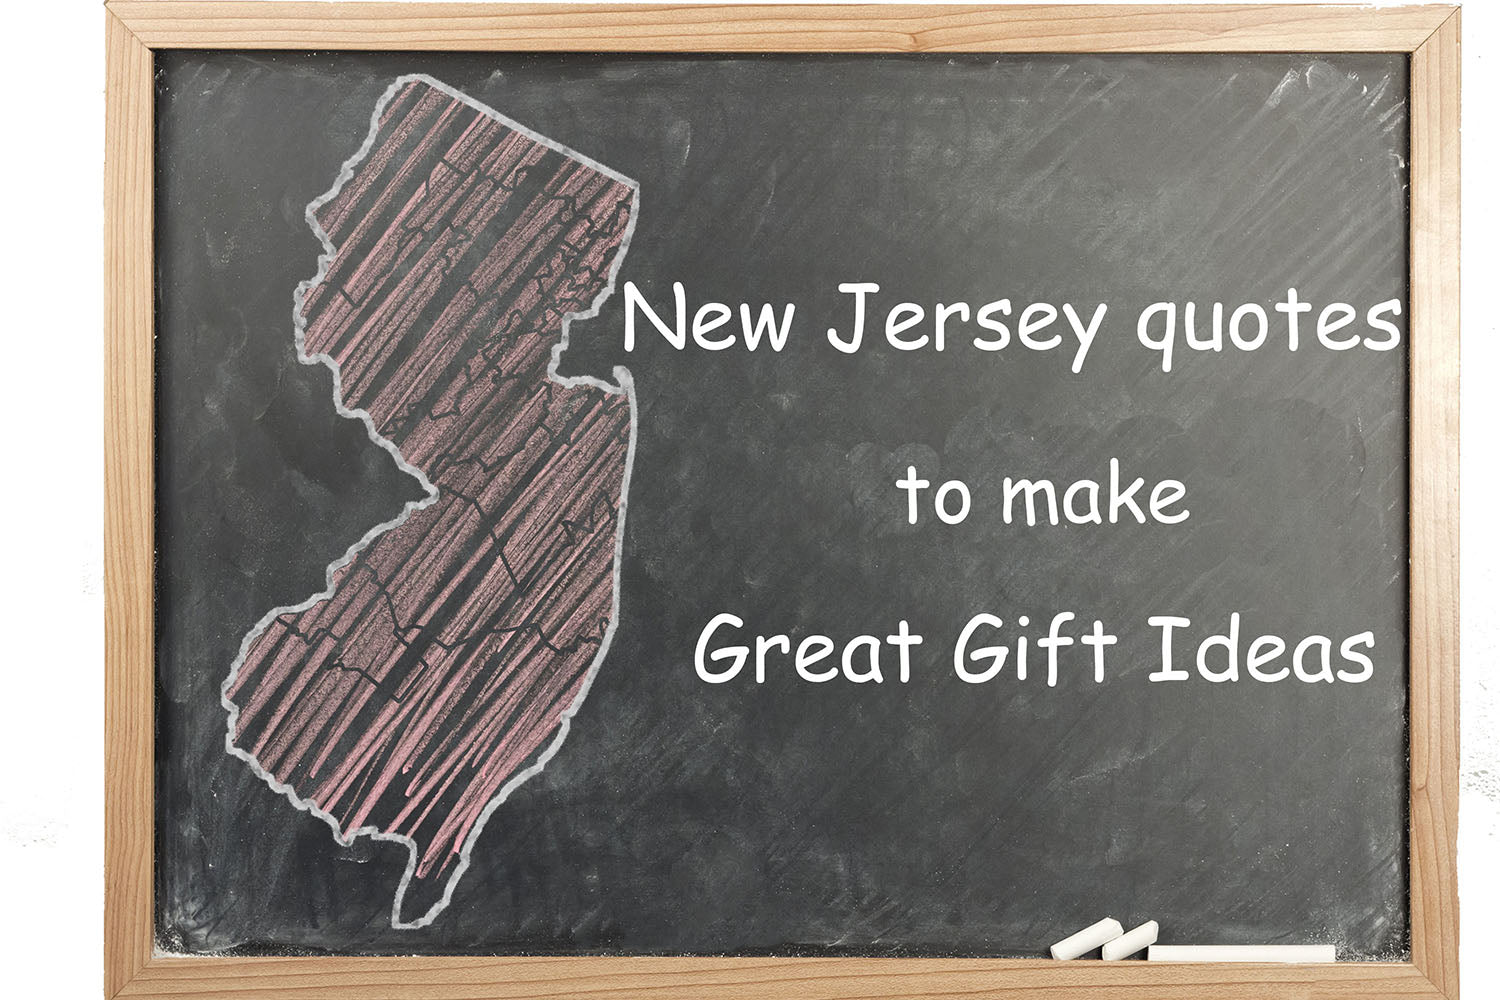 41 New Jersey Quotes to Make Great Gift Ideas